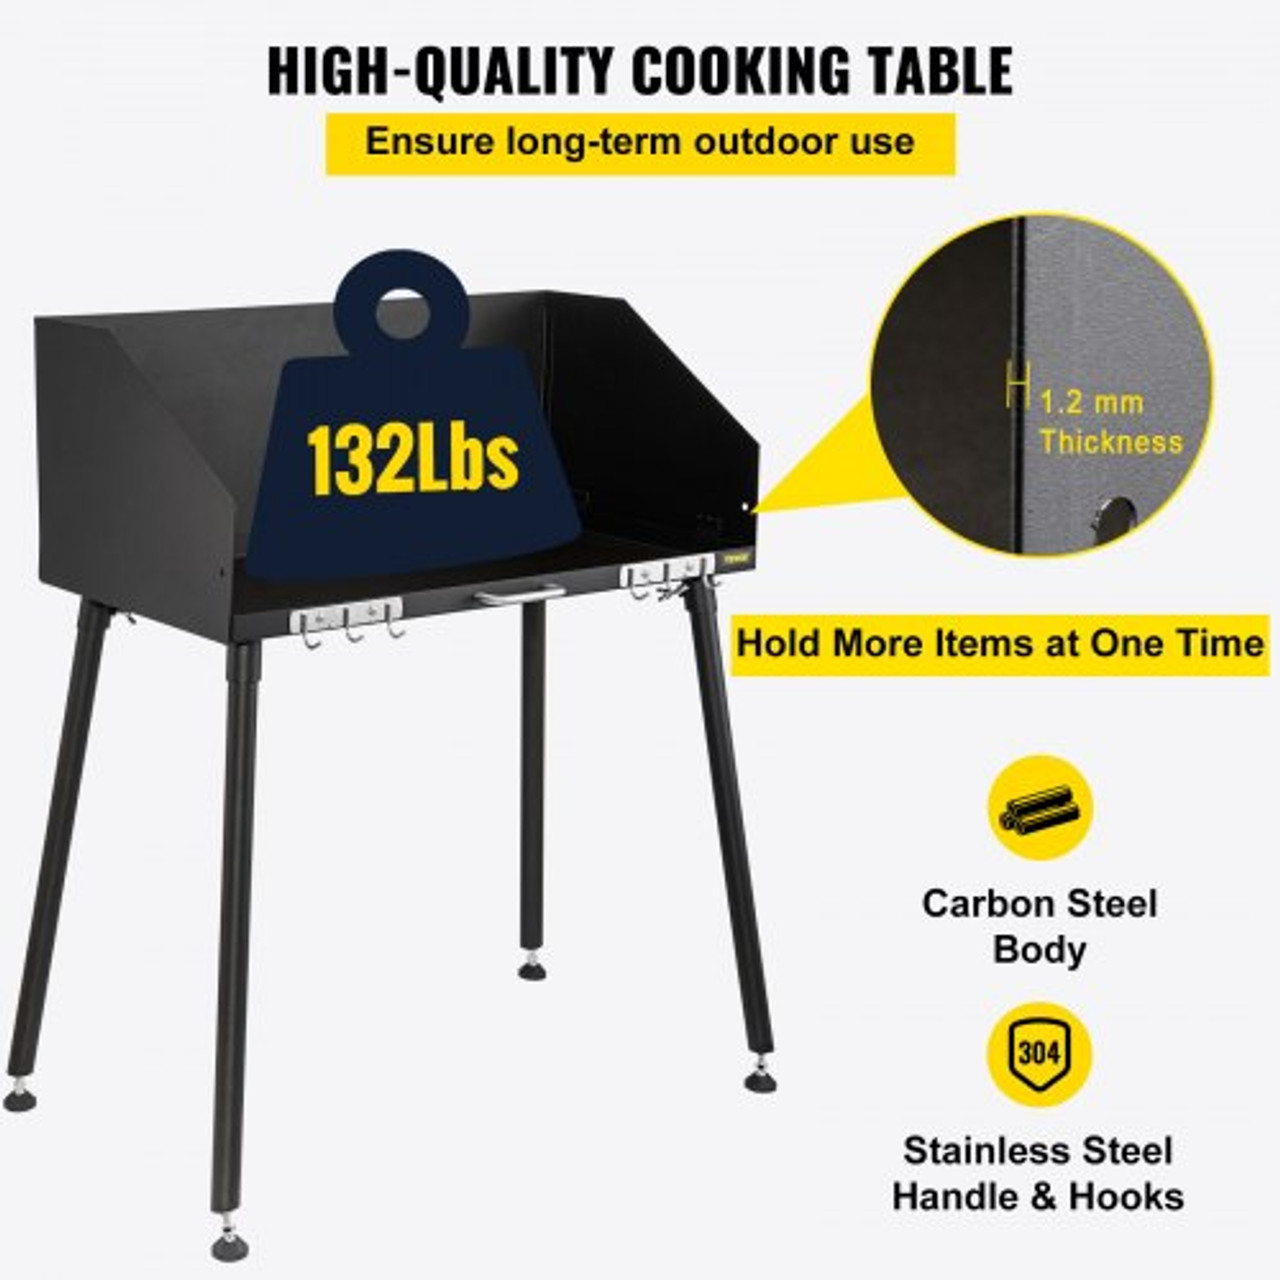 Carbon Steel Camp Cooking Table 30 x 16 Inch with Three-Sided Windscreen and Legs for Outdoor Food Preparation and Dutch Oven